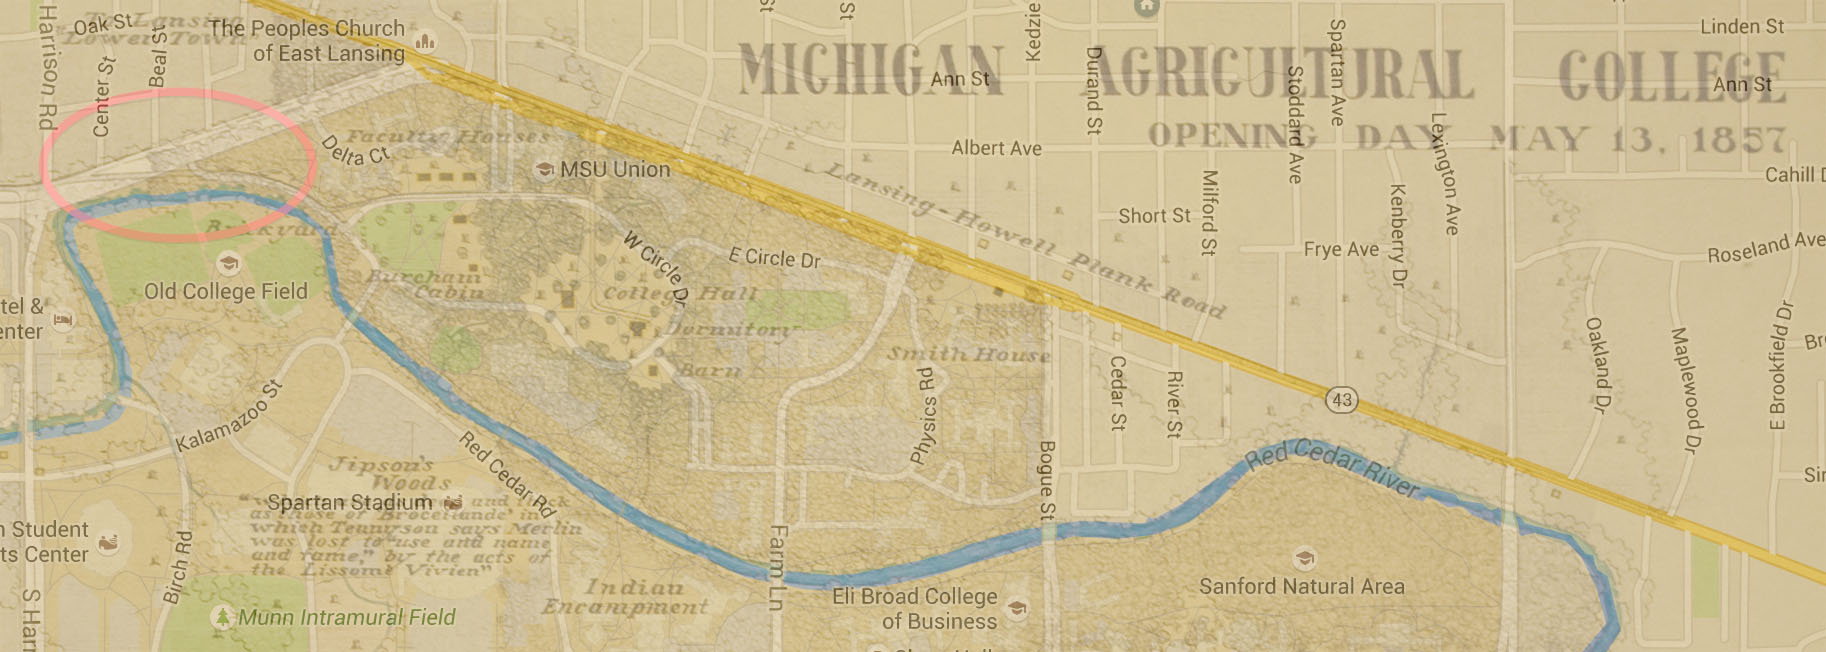 Michigan-Agricultural-College-Map-1857